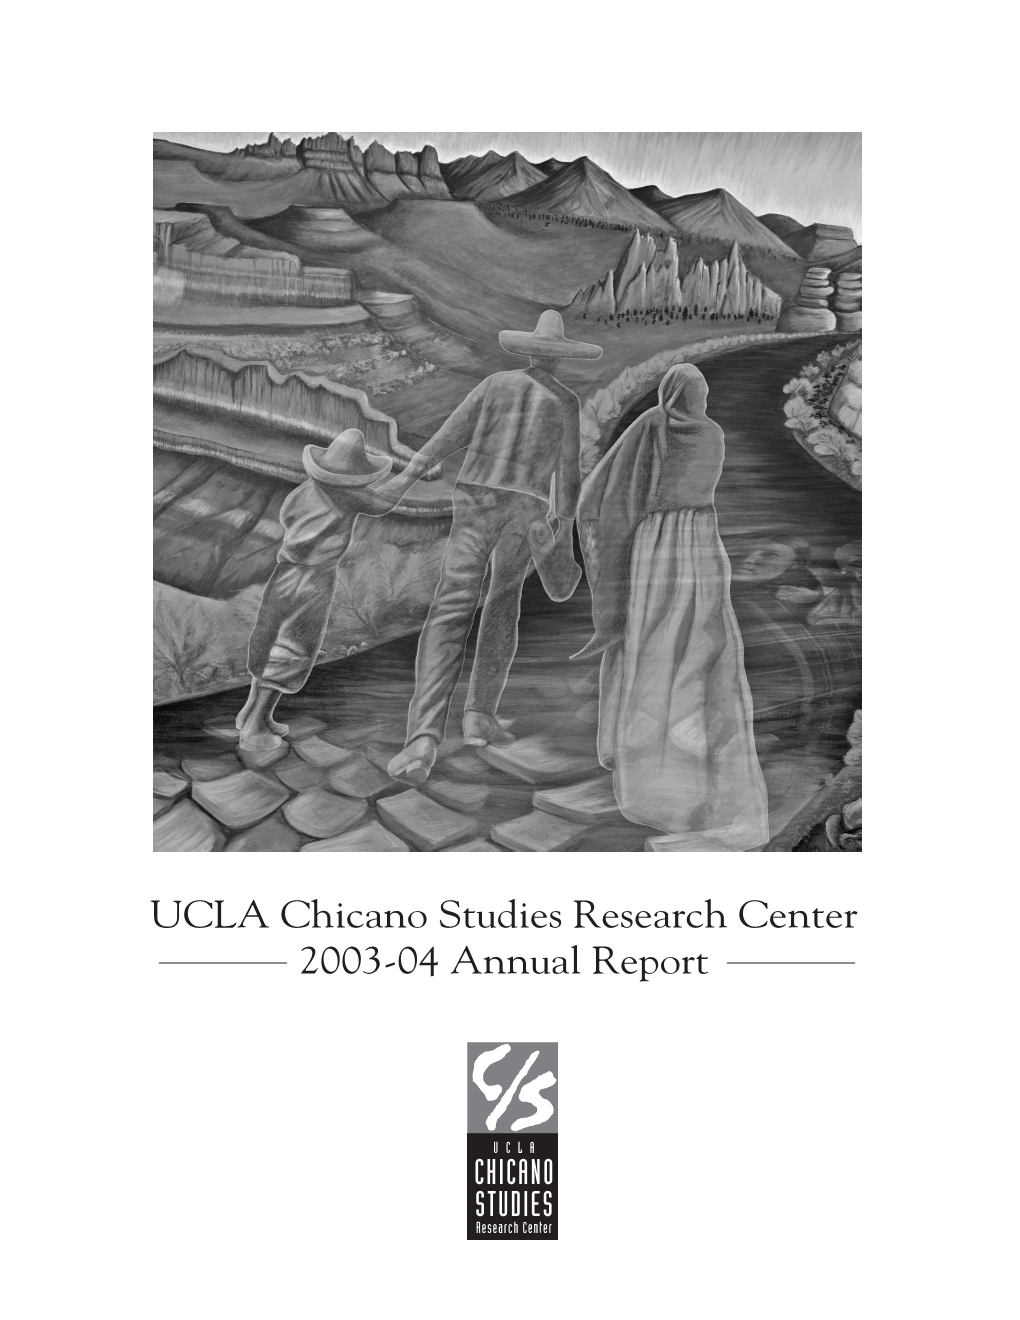 UCLA Chicano Studies Research Center 2003-04 Annual Report